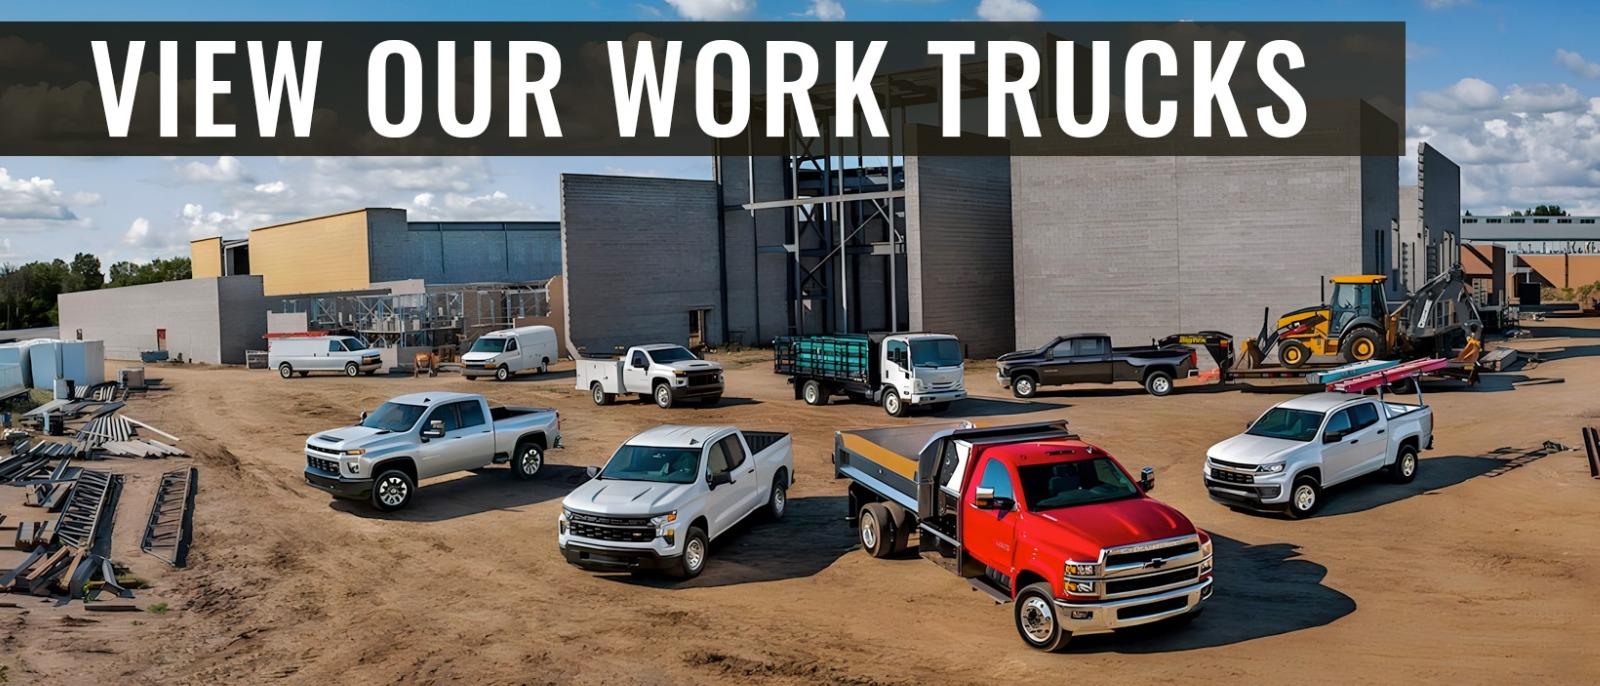 View Our Work Trucks